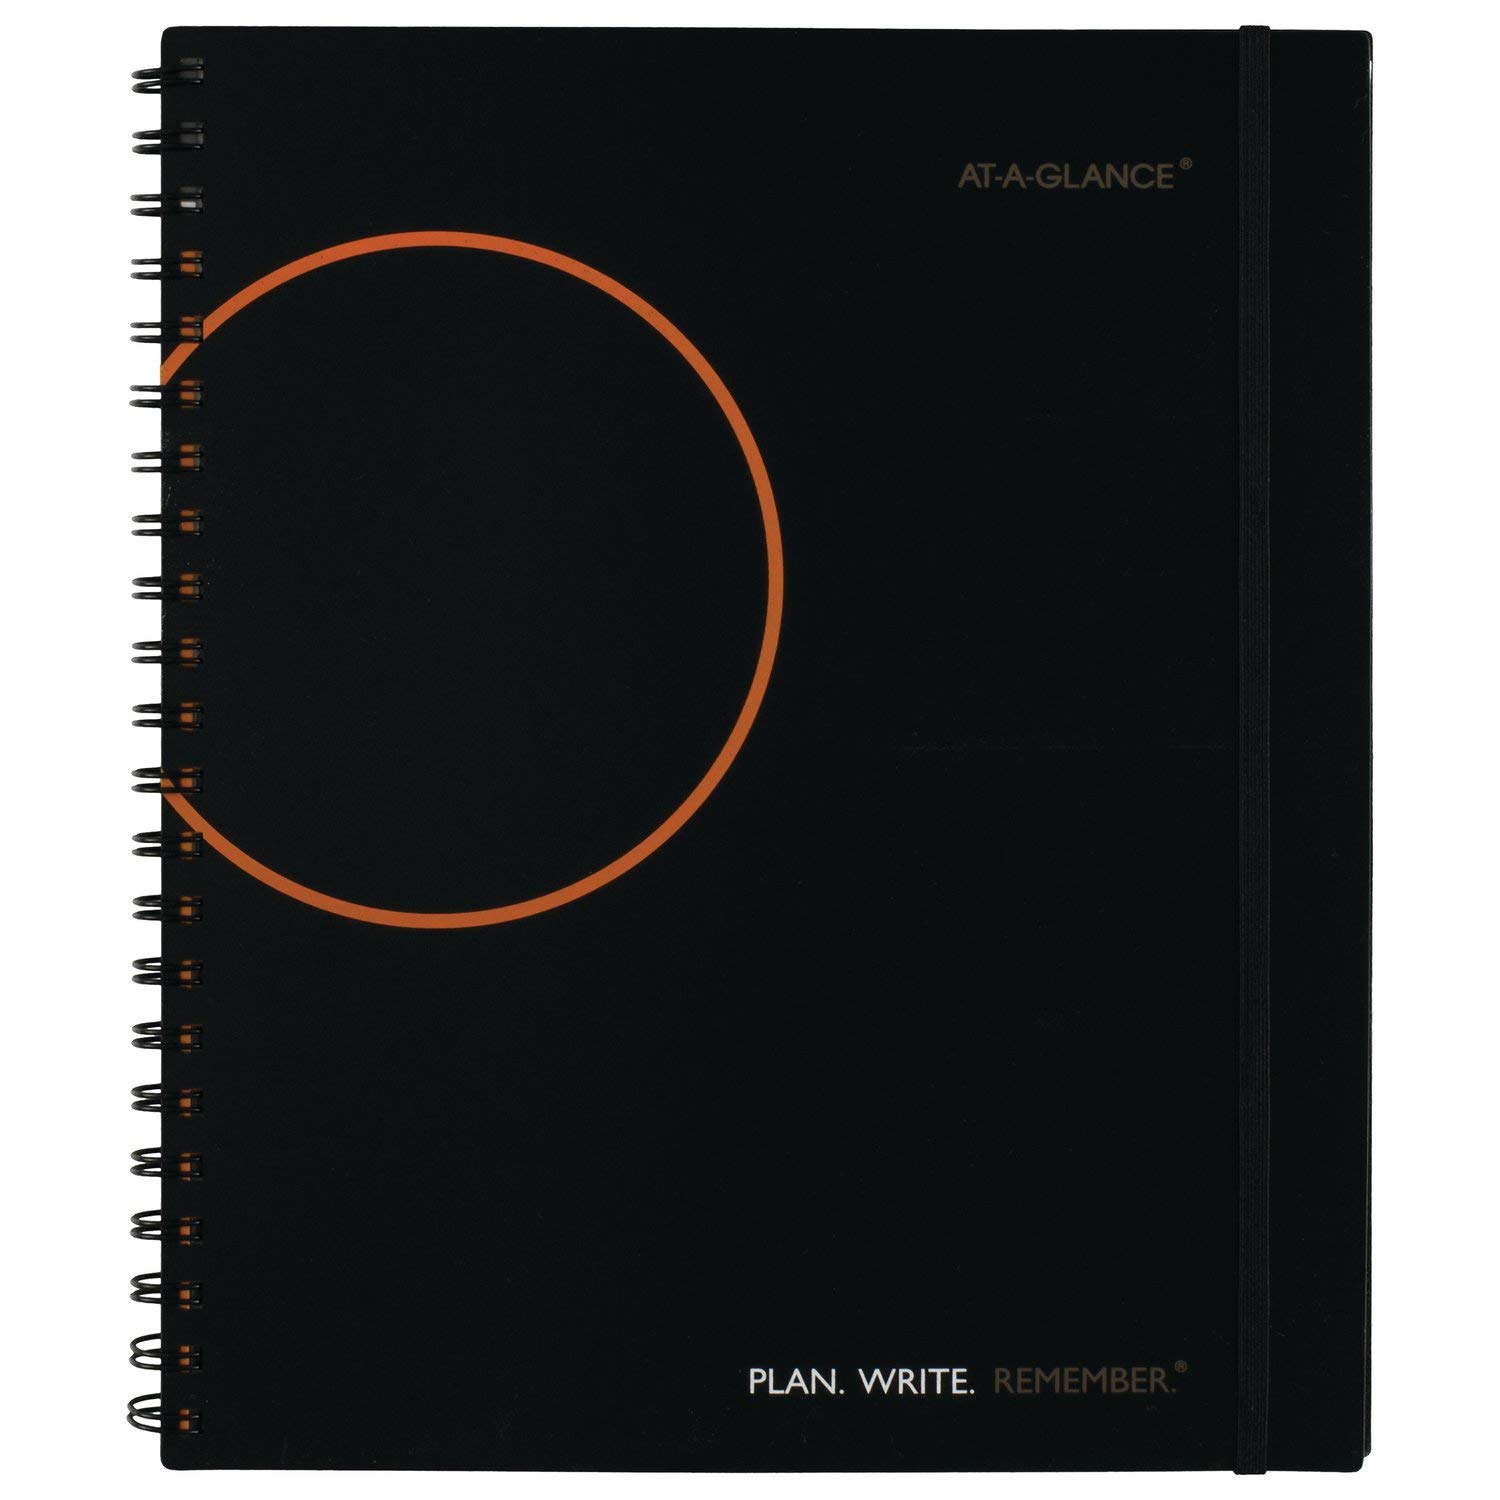 Undated Planning Notebook with Reference Calendars, Plan.Write.Remember., 9.19 x 11 Inches, Black